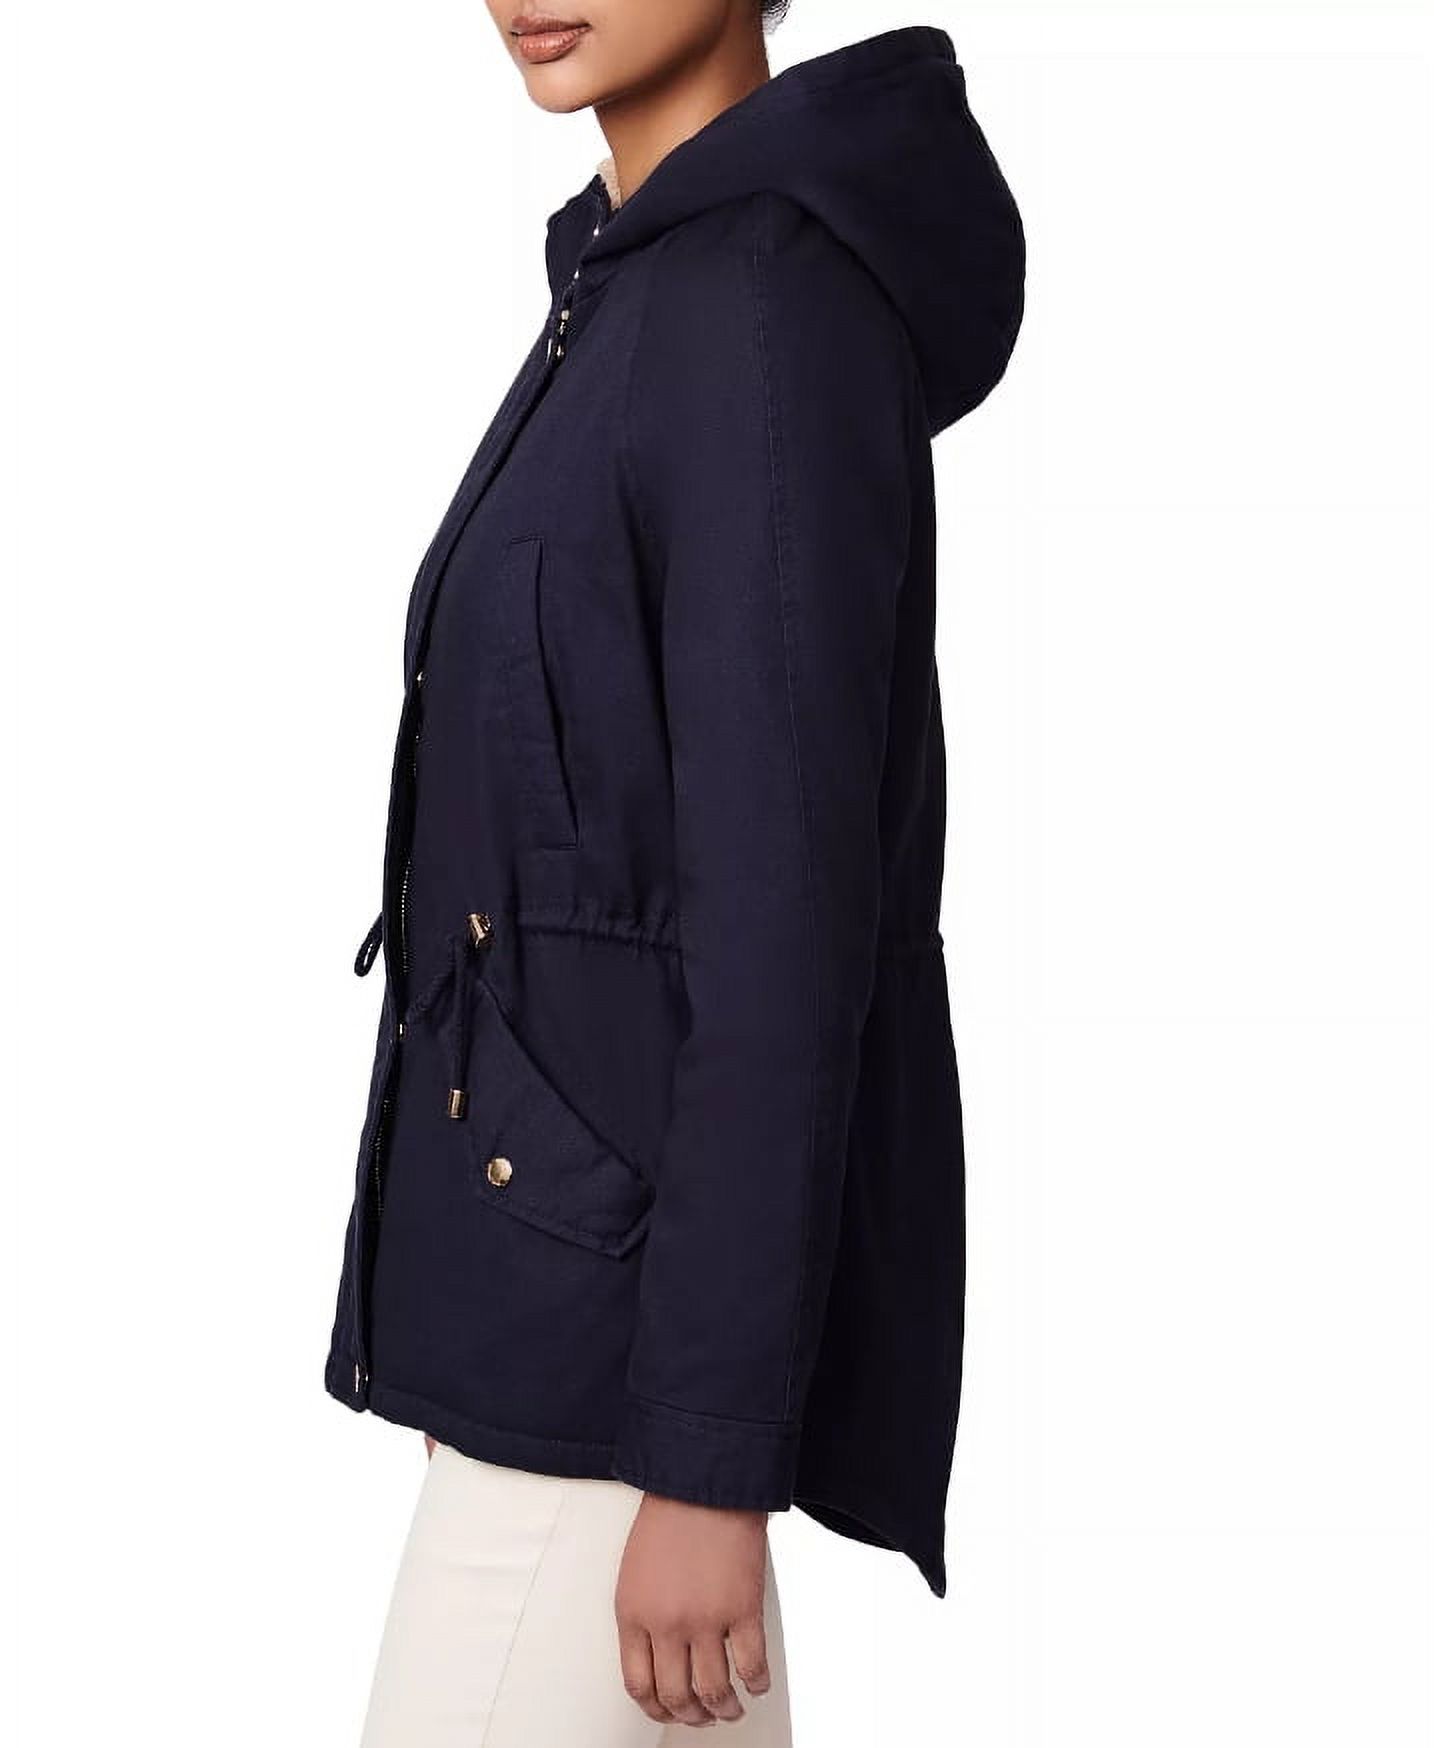 COLLECTIONB Womens Navy Pocketed Zippered Hooded Anorak Button Down Jacket Juniors XS - image 2 of 3